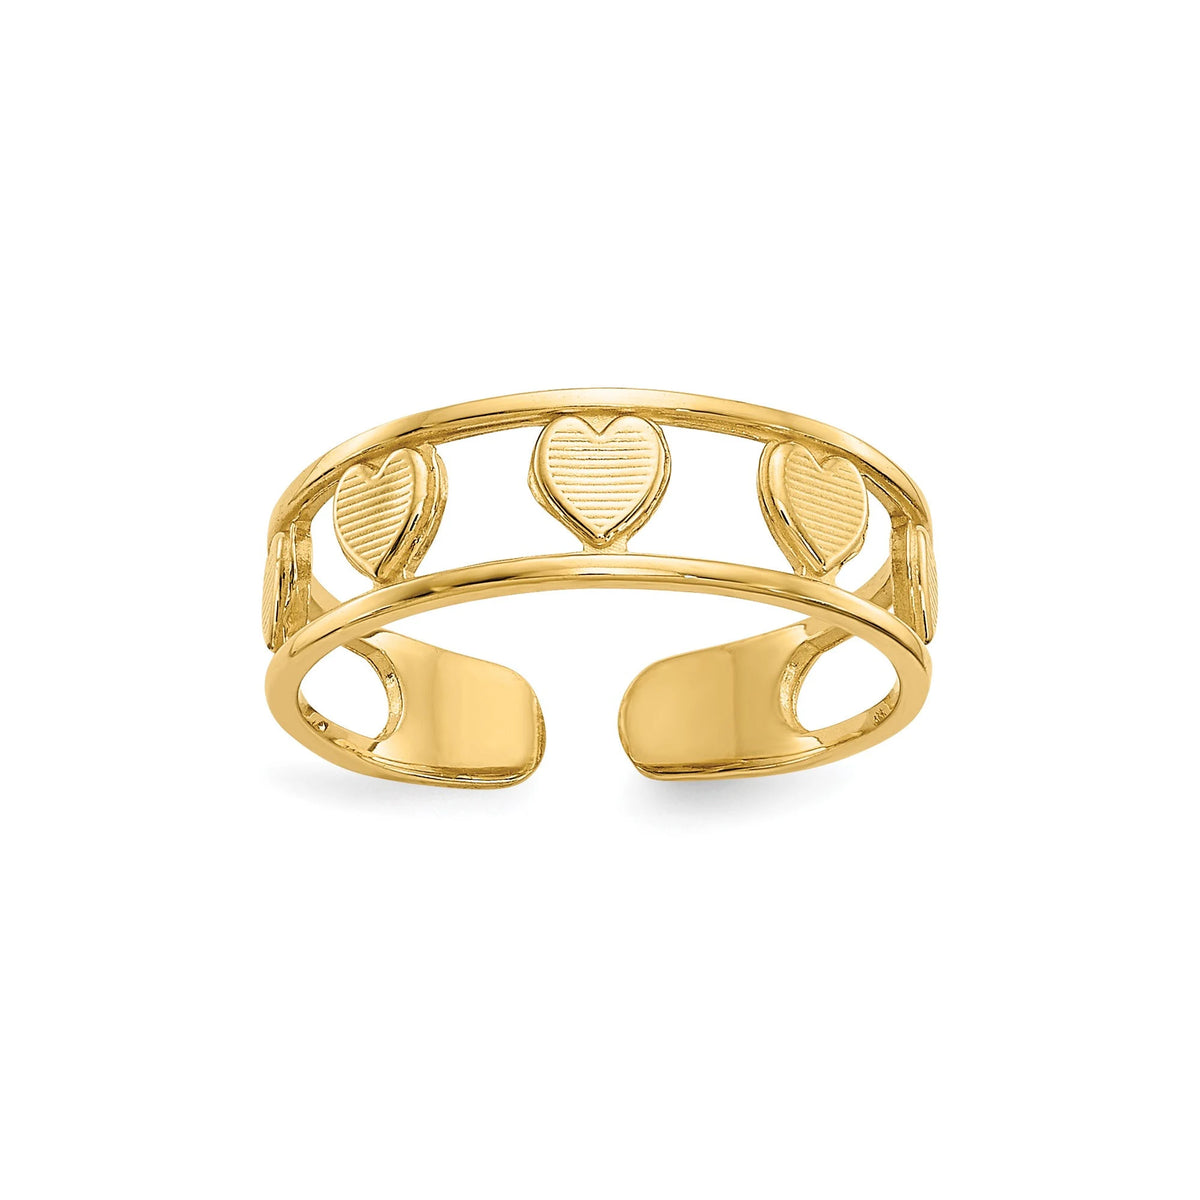 14k Yellow Gold Open Hearts Toe Ring 5mm Band Solid Gold - Gift Box Included - Made in USA